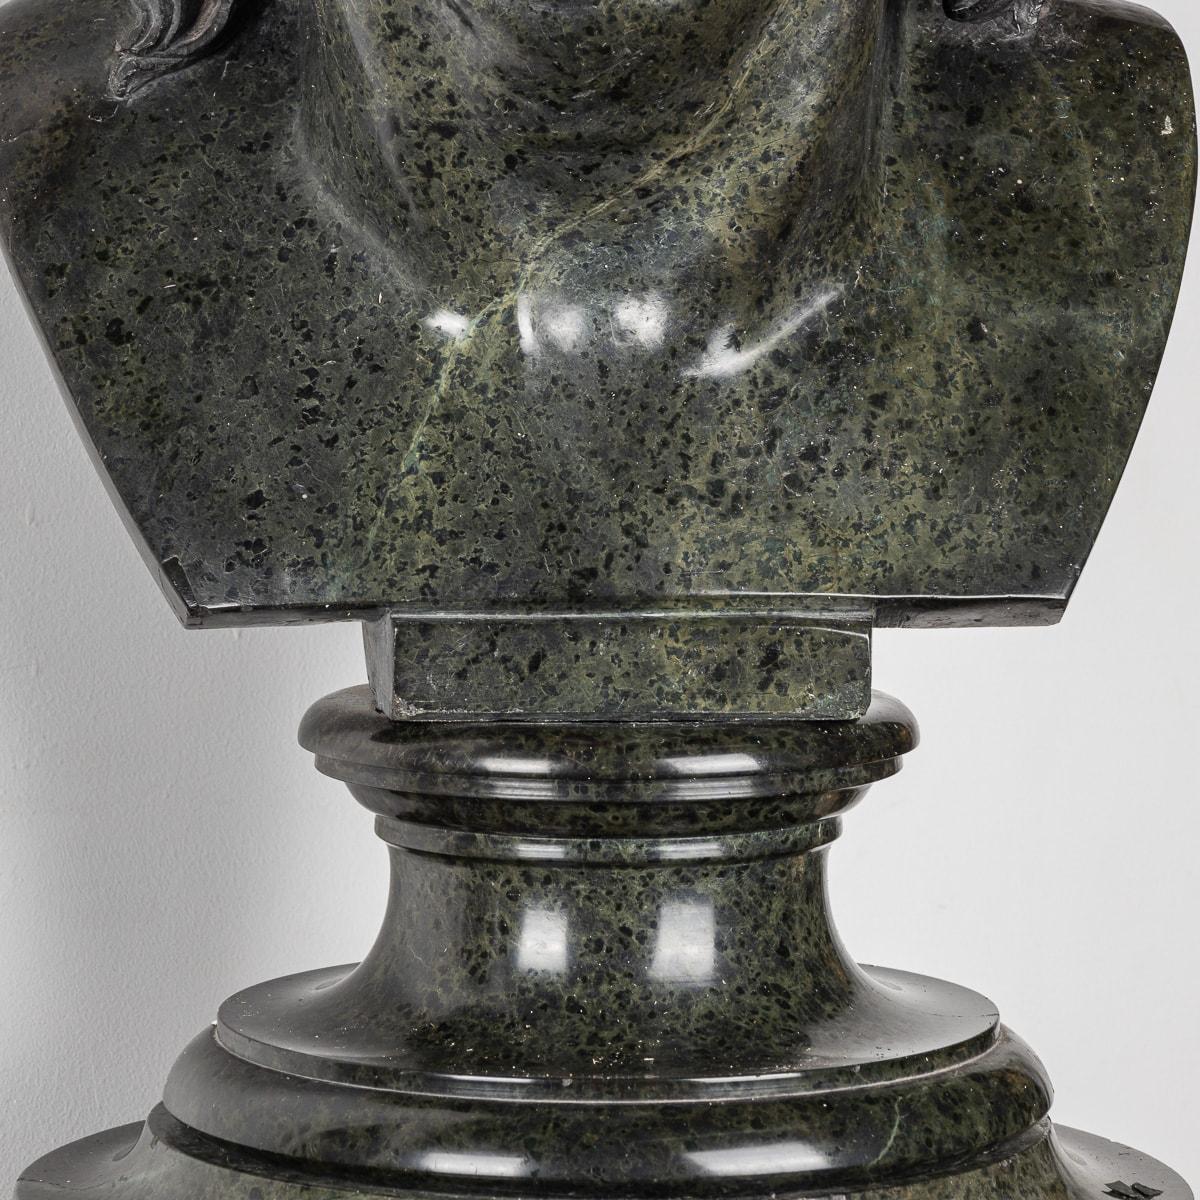 Crafted in the 20th Century, this Antique Italian green marble sculpture depicts the bust of a sorrowful young man gazing to his right. Resting upon a two-part pedestal crafted from Italian marble, this exquisite masterpiece radiates grace and